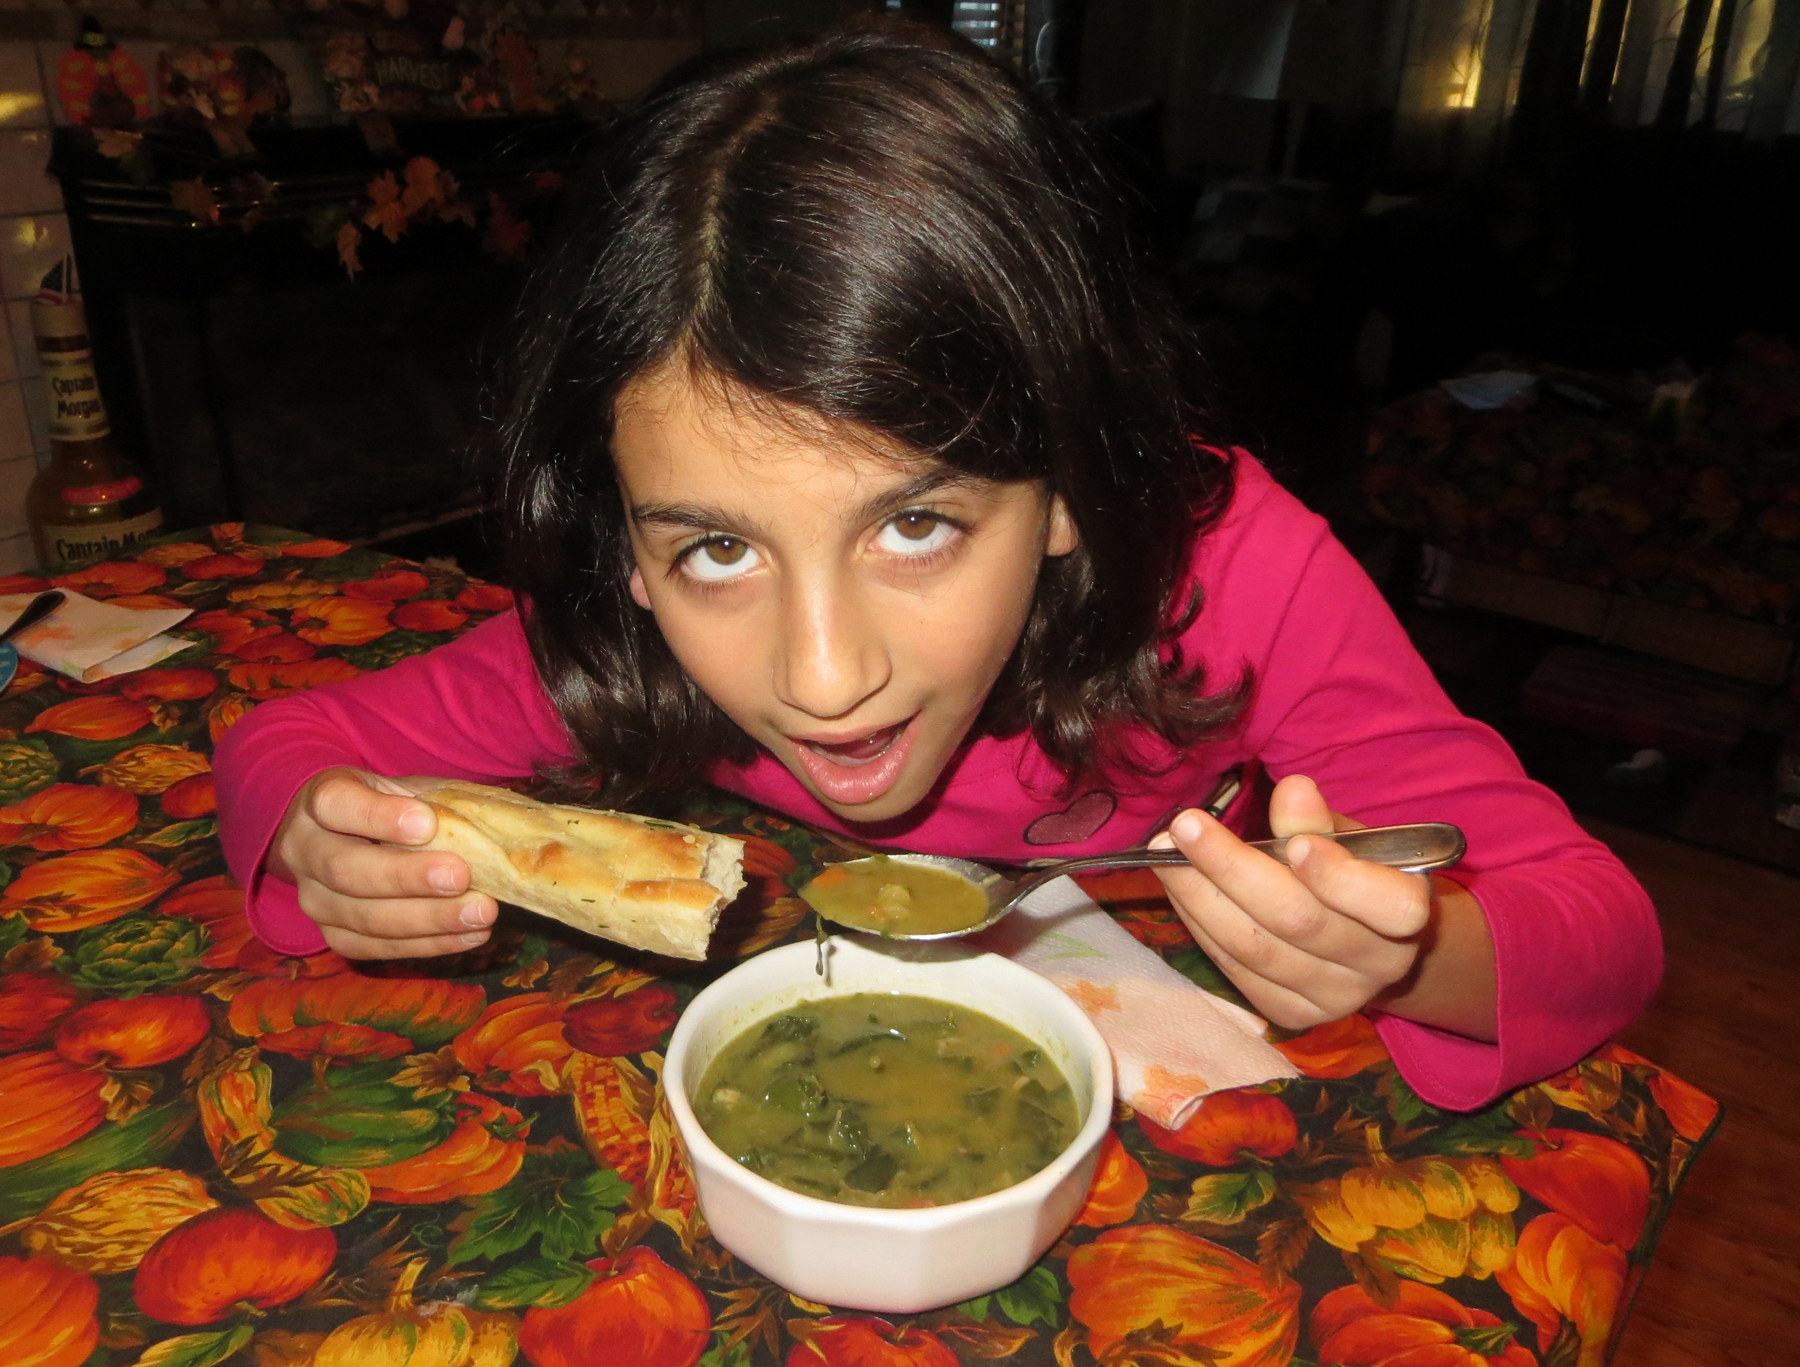 Julianna gave the thumbs-up on the soup!